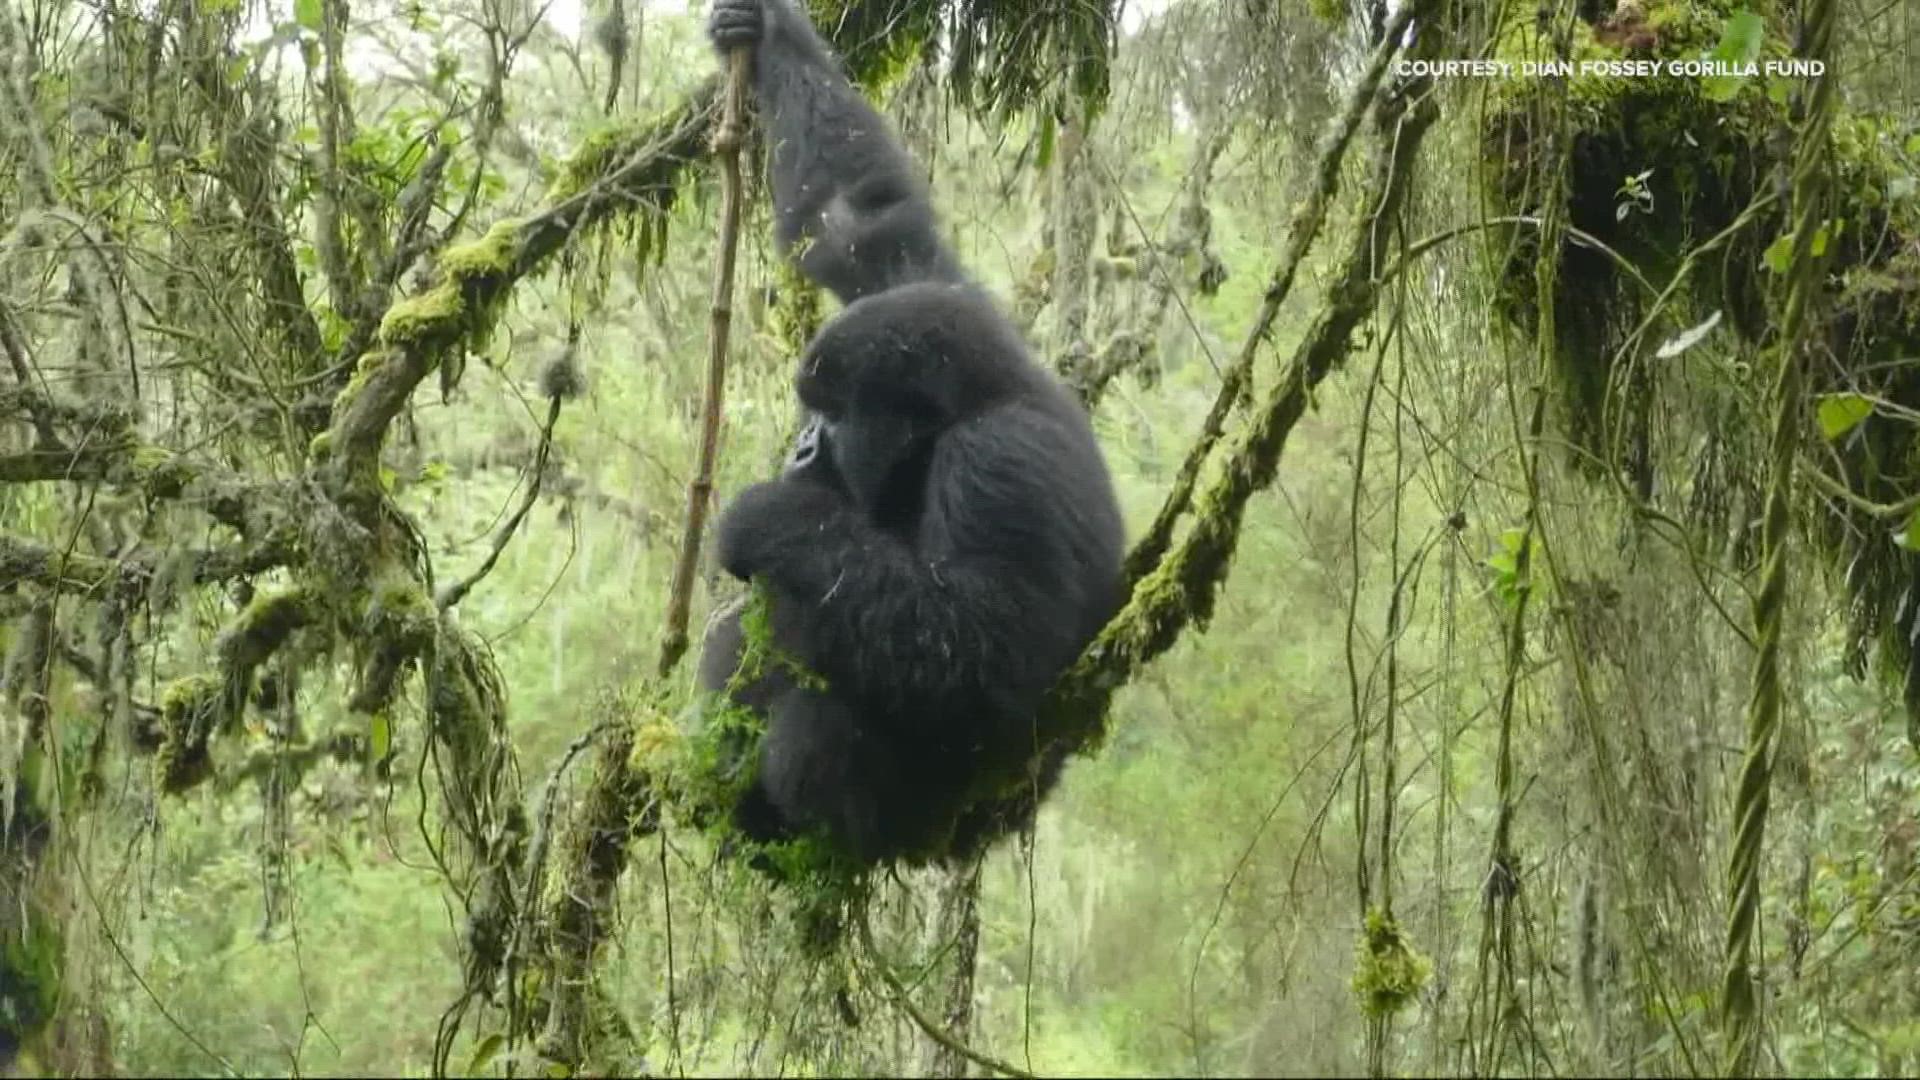 Gorillas are among the 1 million species on Earth that are at risk for extinction.